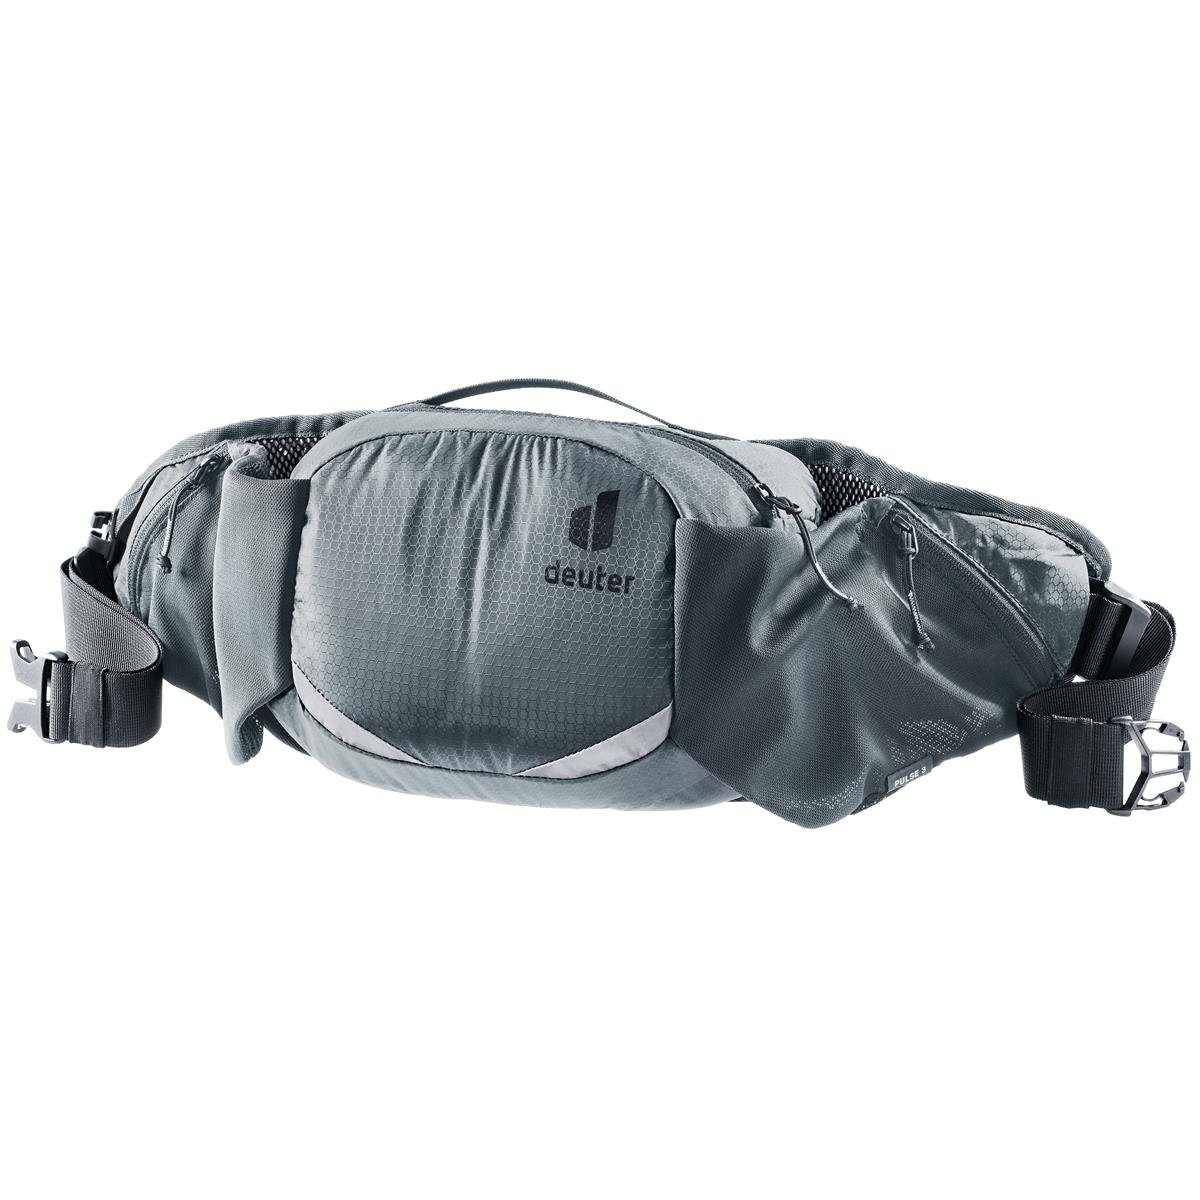 Hip Pack with Hydration System 3 Graphite | Maciag